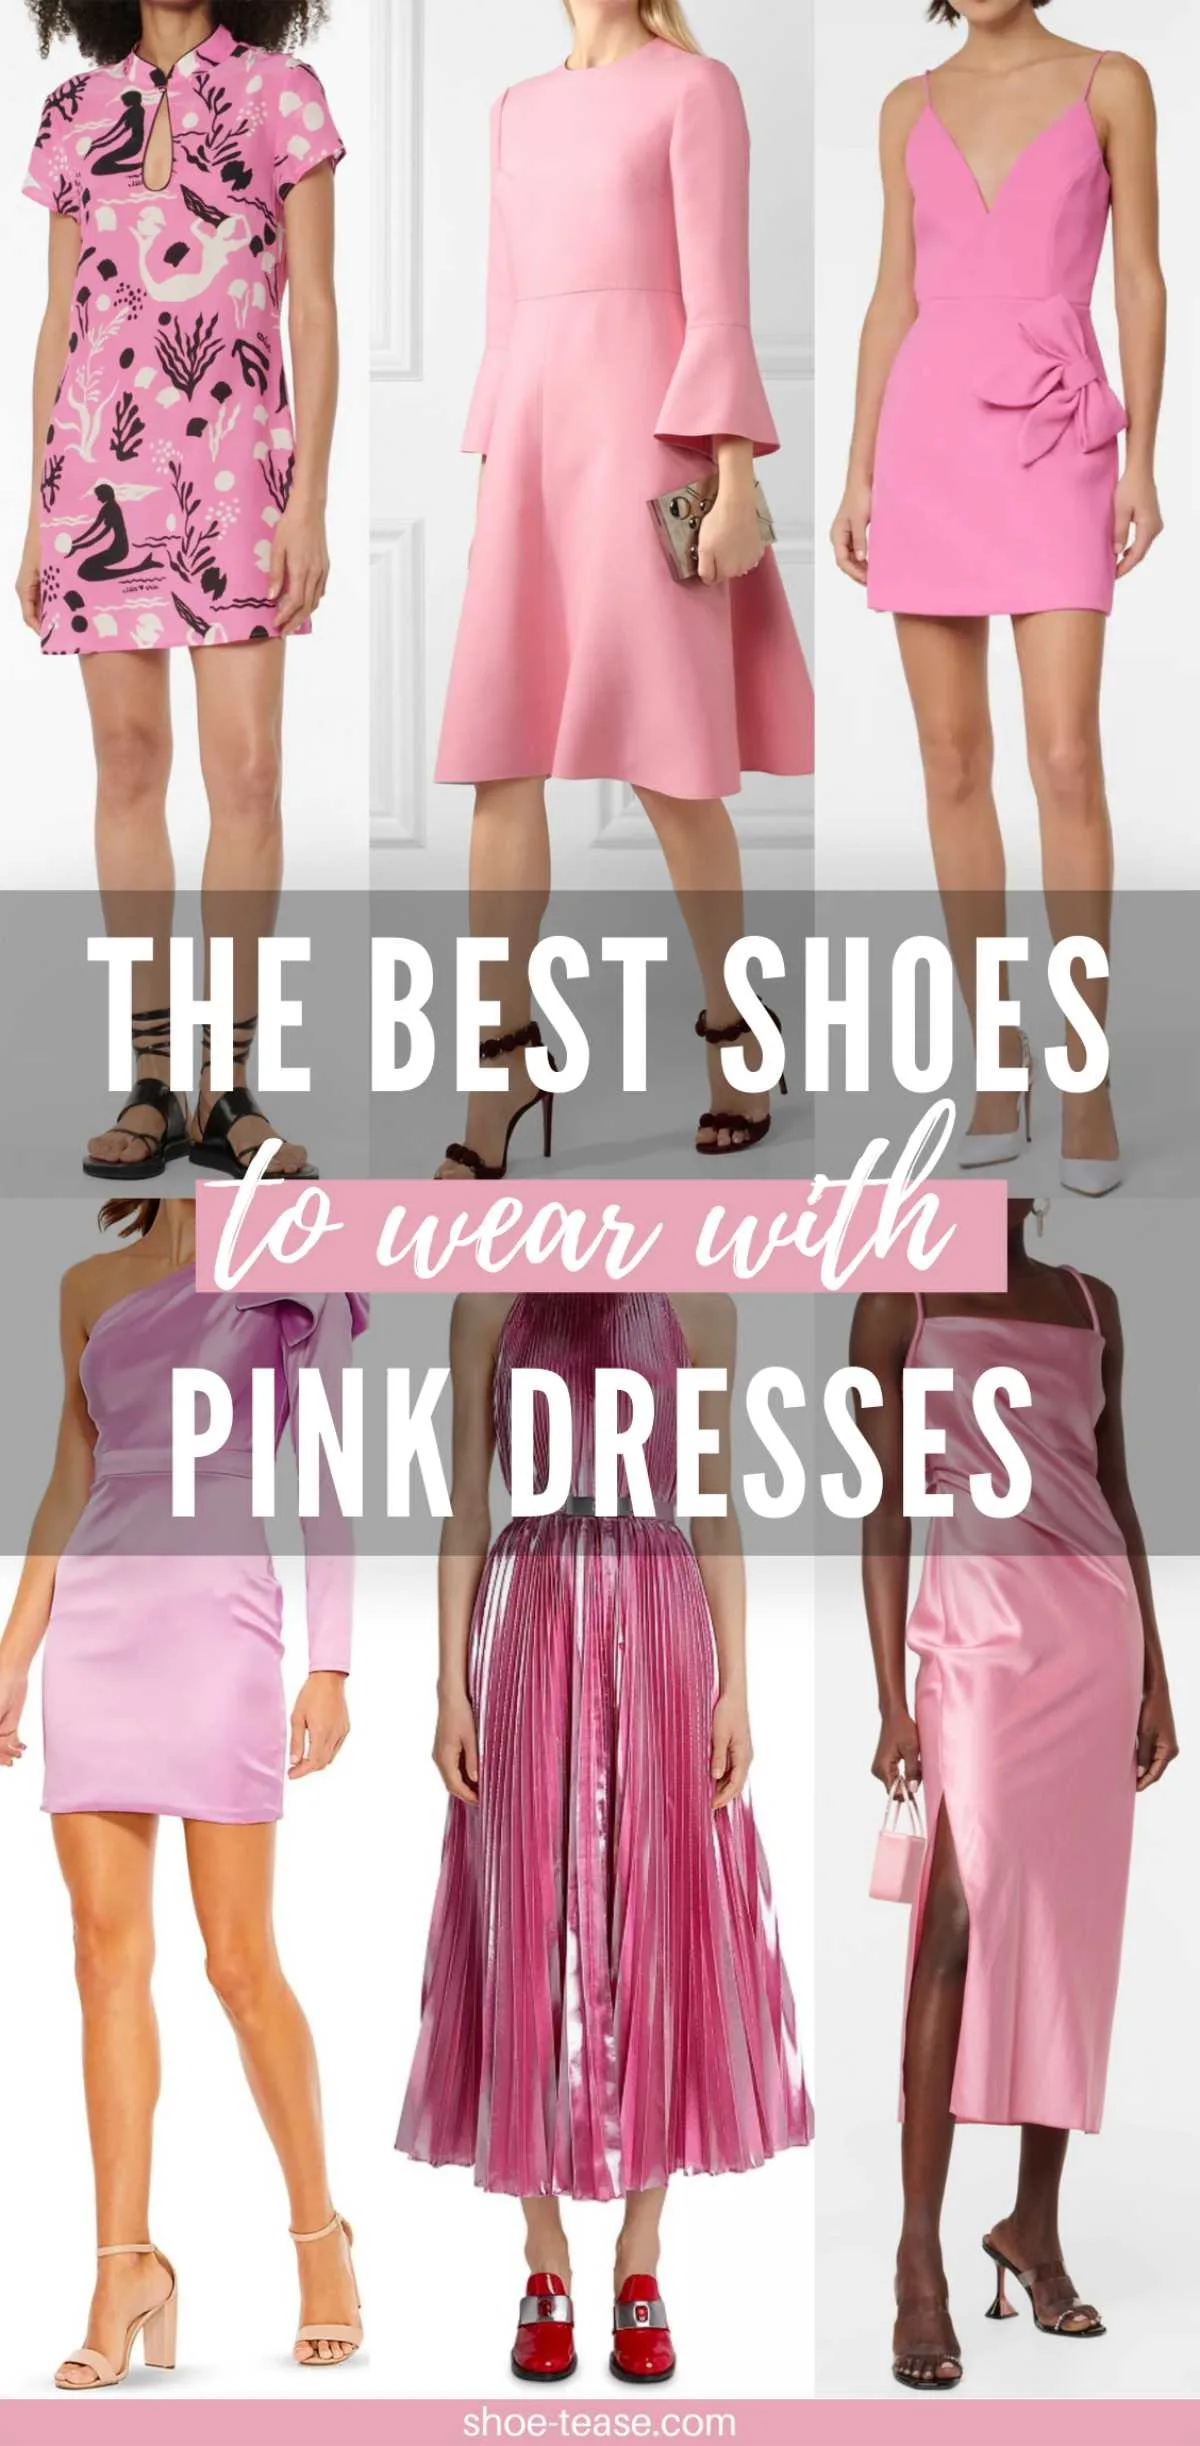 What color shoes to wear with light pink dress